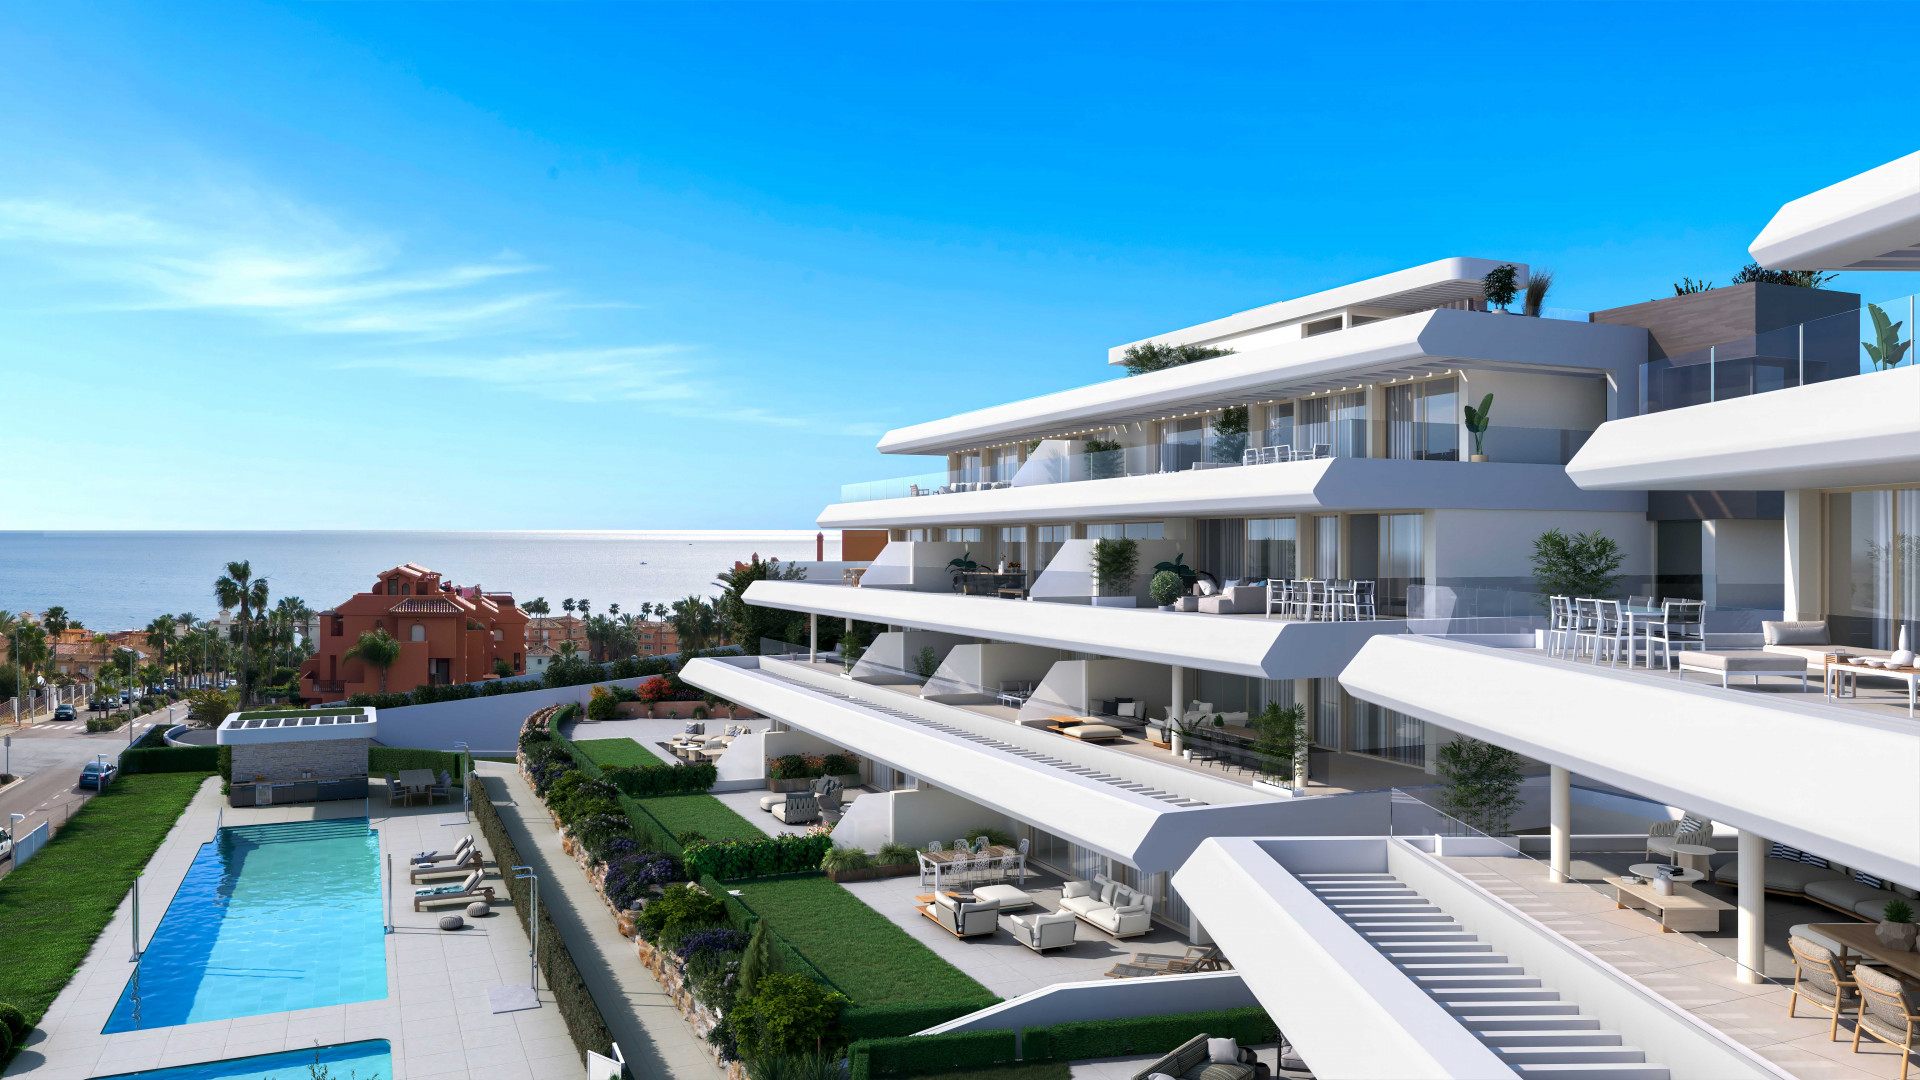 New contemporary beach off-plan apartments and penthouses for sale in Estepona